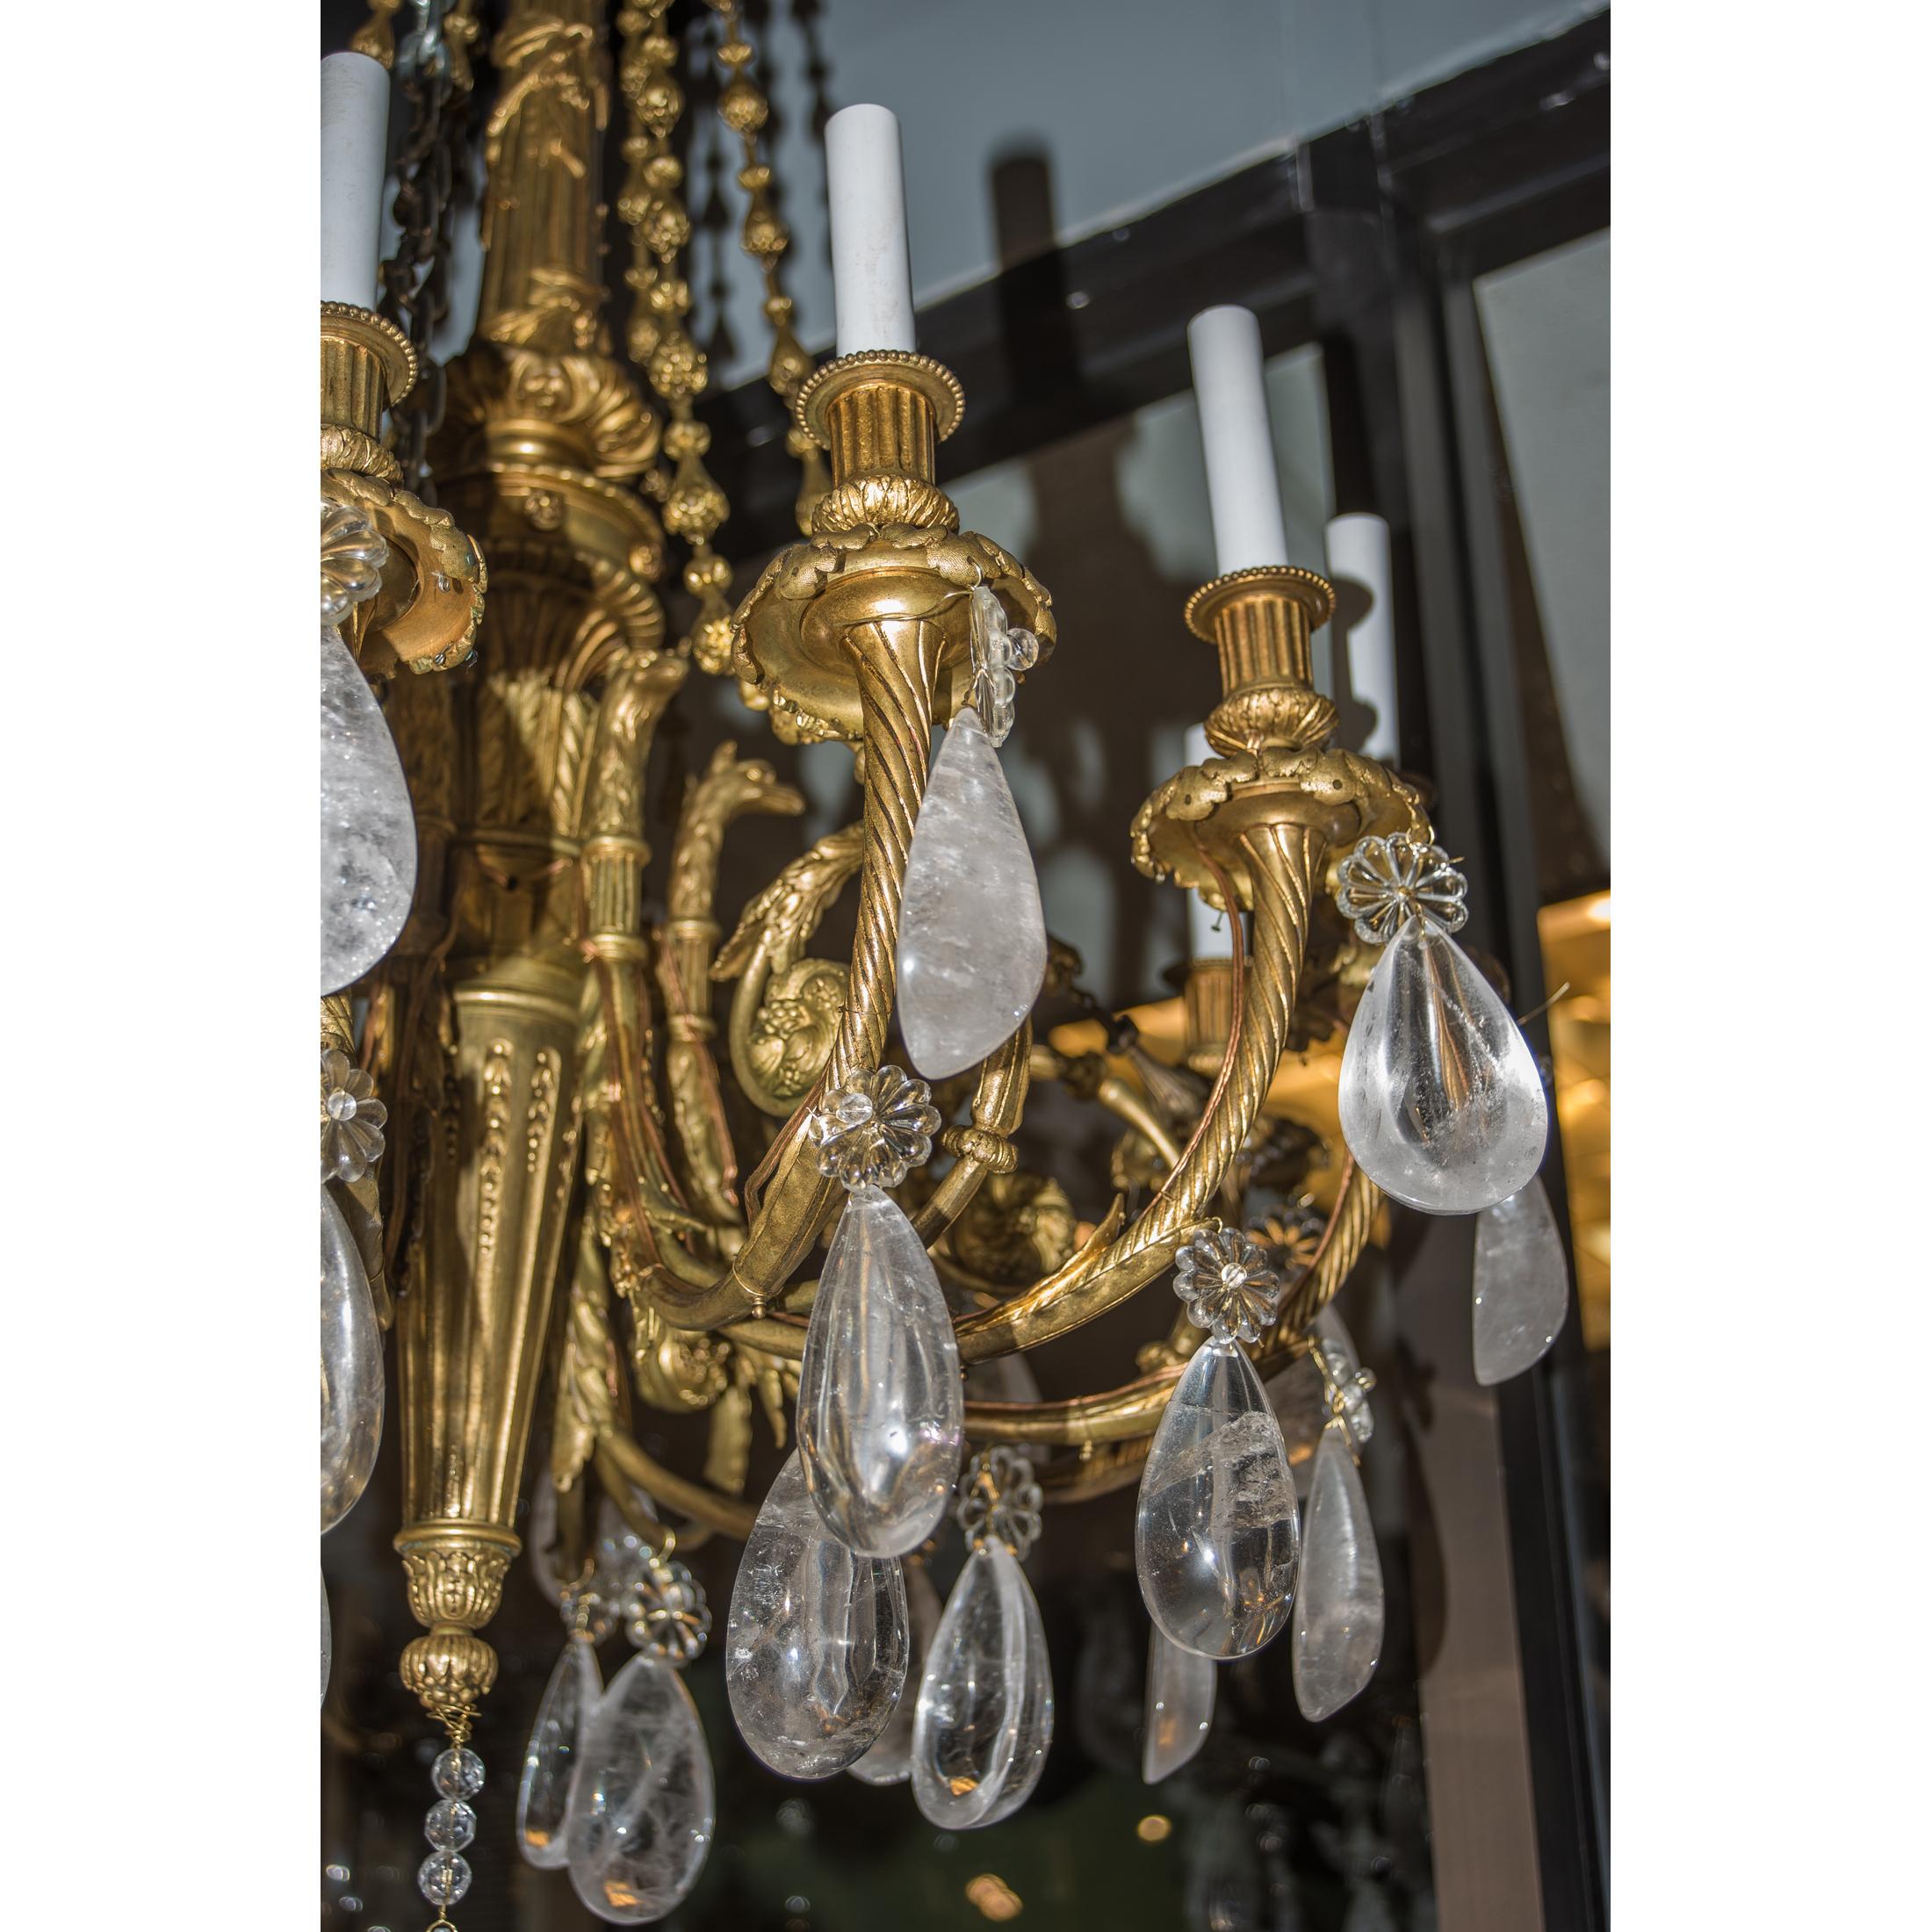 About
A fine quality and elegant French ormolu and rock crystal twelve-light chandelier.

Date: 19th century
Origin: French
Size: 45 x 28 inches.